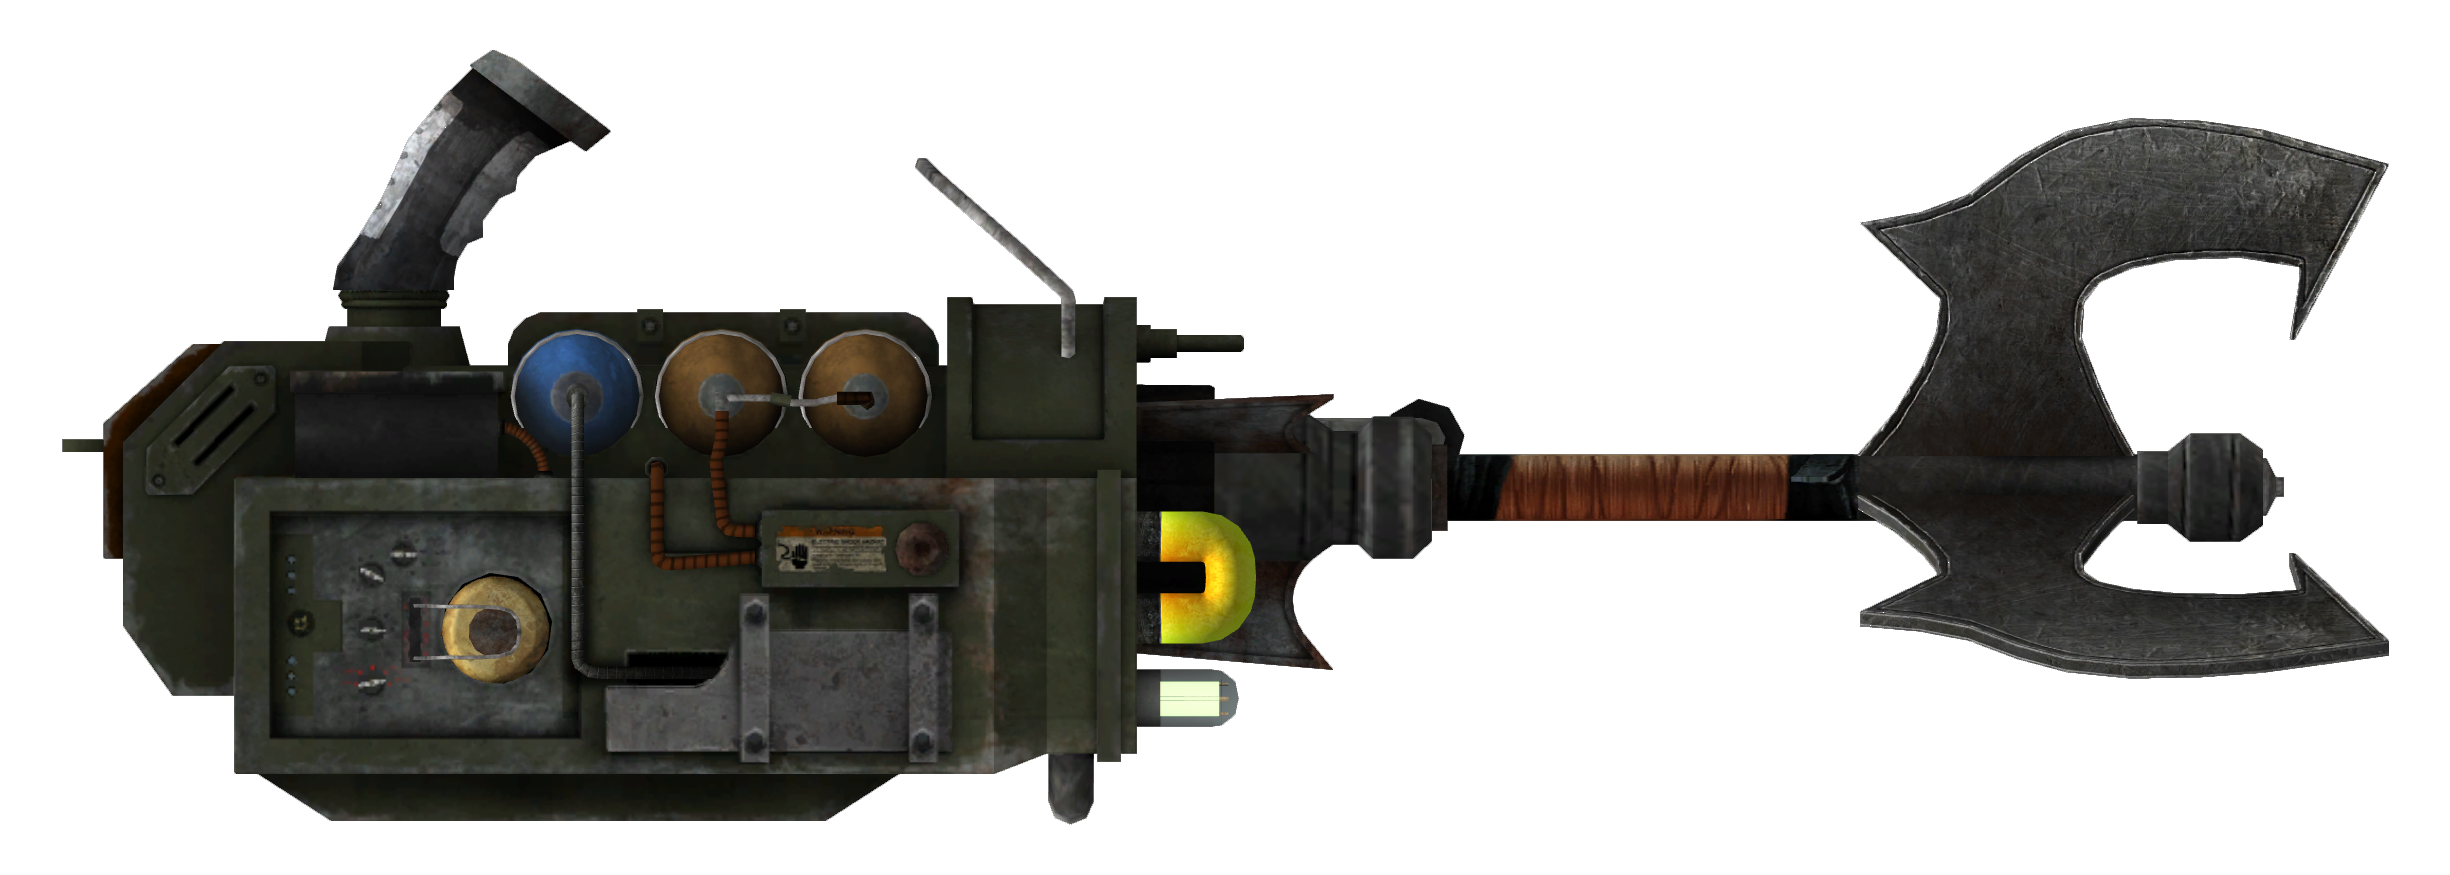 new vegas ultimate edition weapons